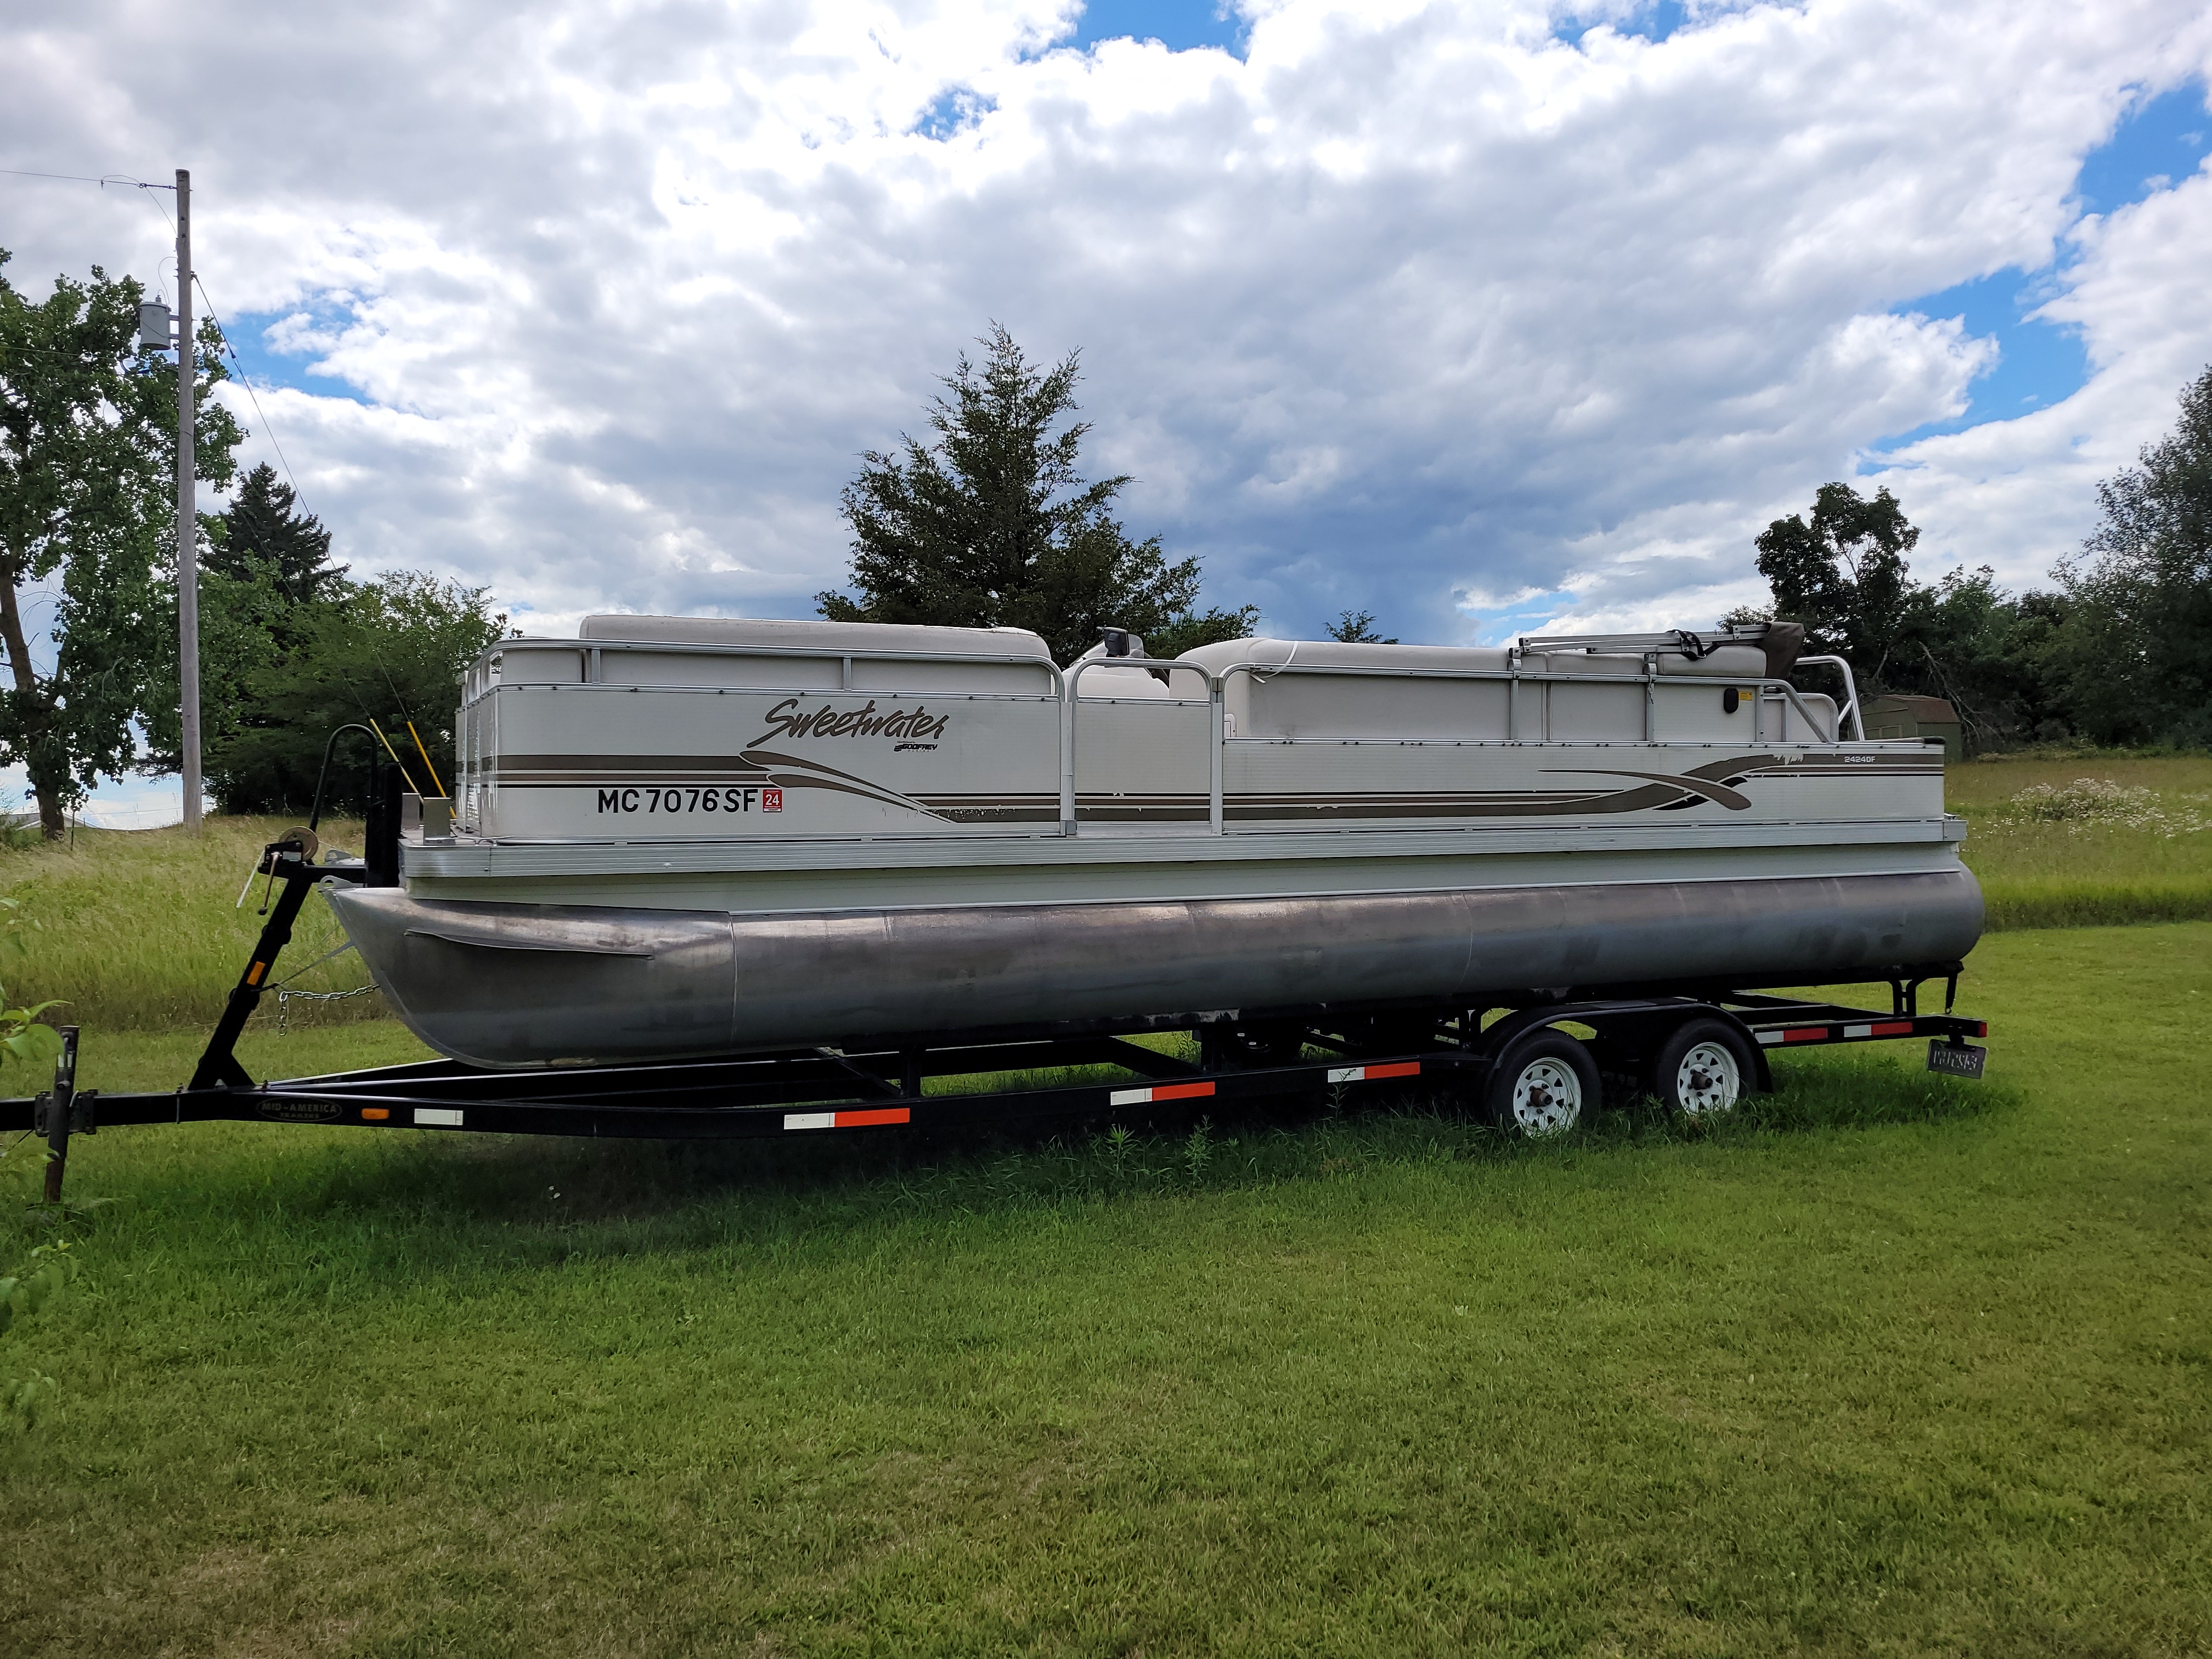 2001 24 foot Sweetwater Fishing pontoon Pontoon Boat for sale in Cement City, MI - image 1 